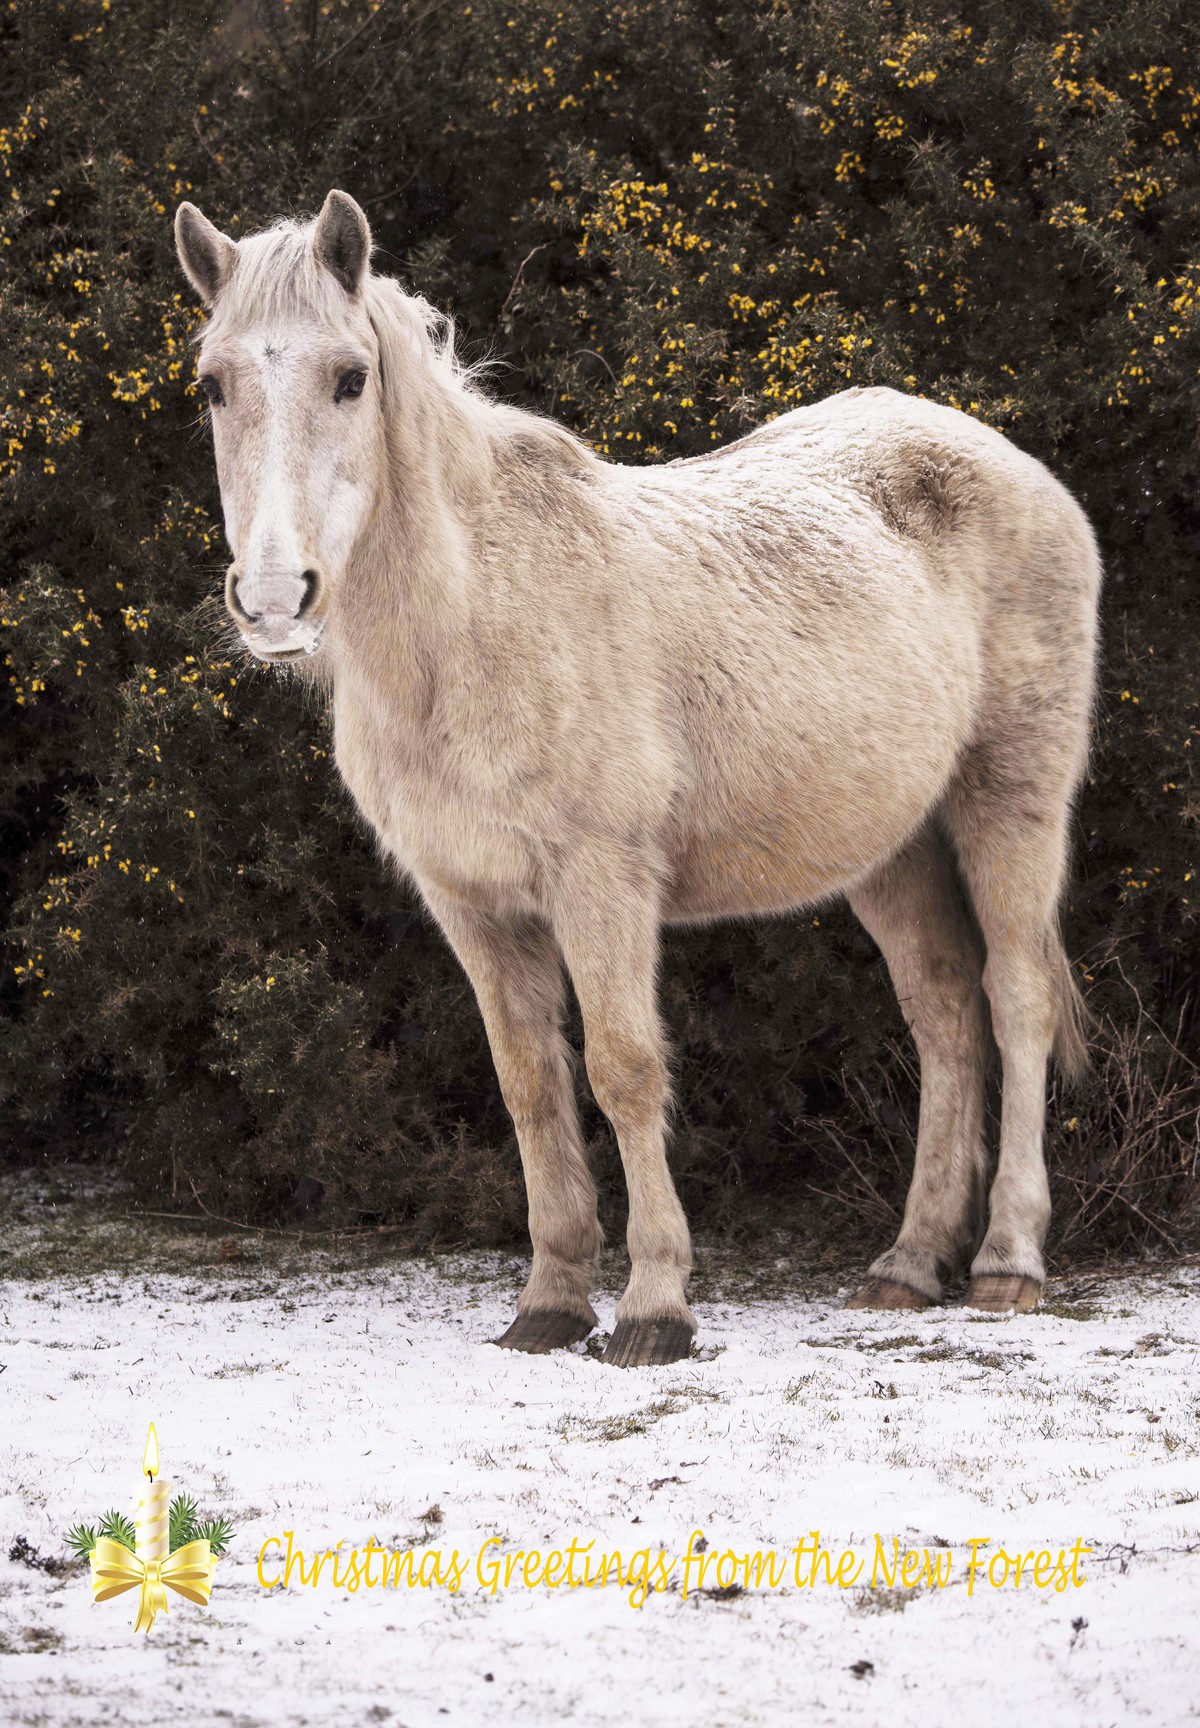 Card design, new forest pony in snow